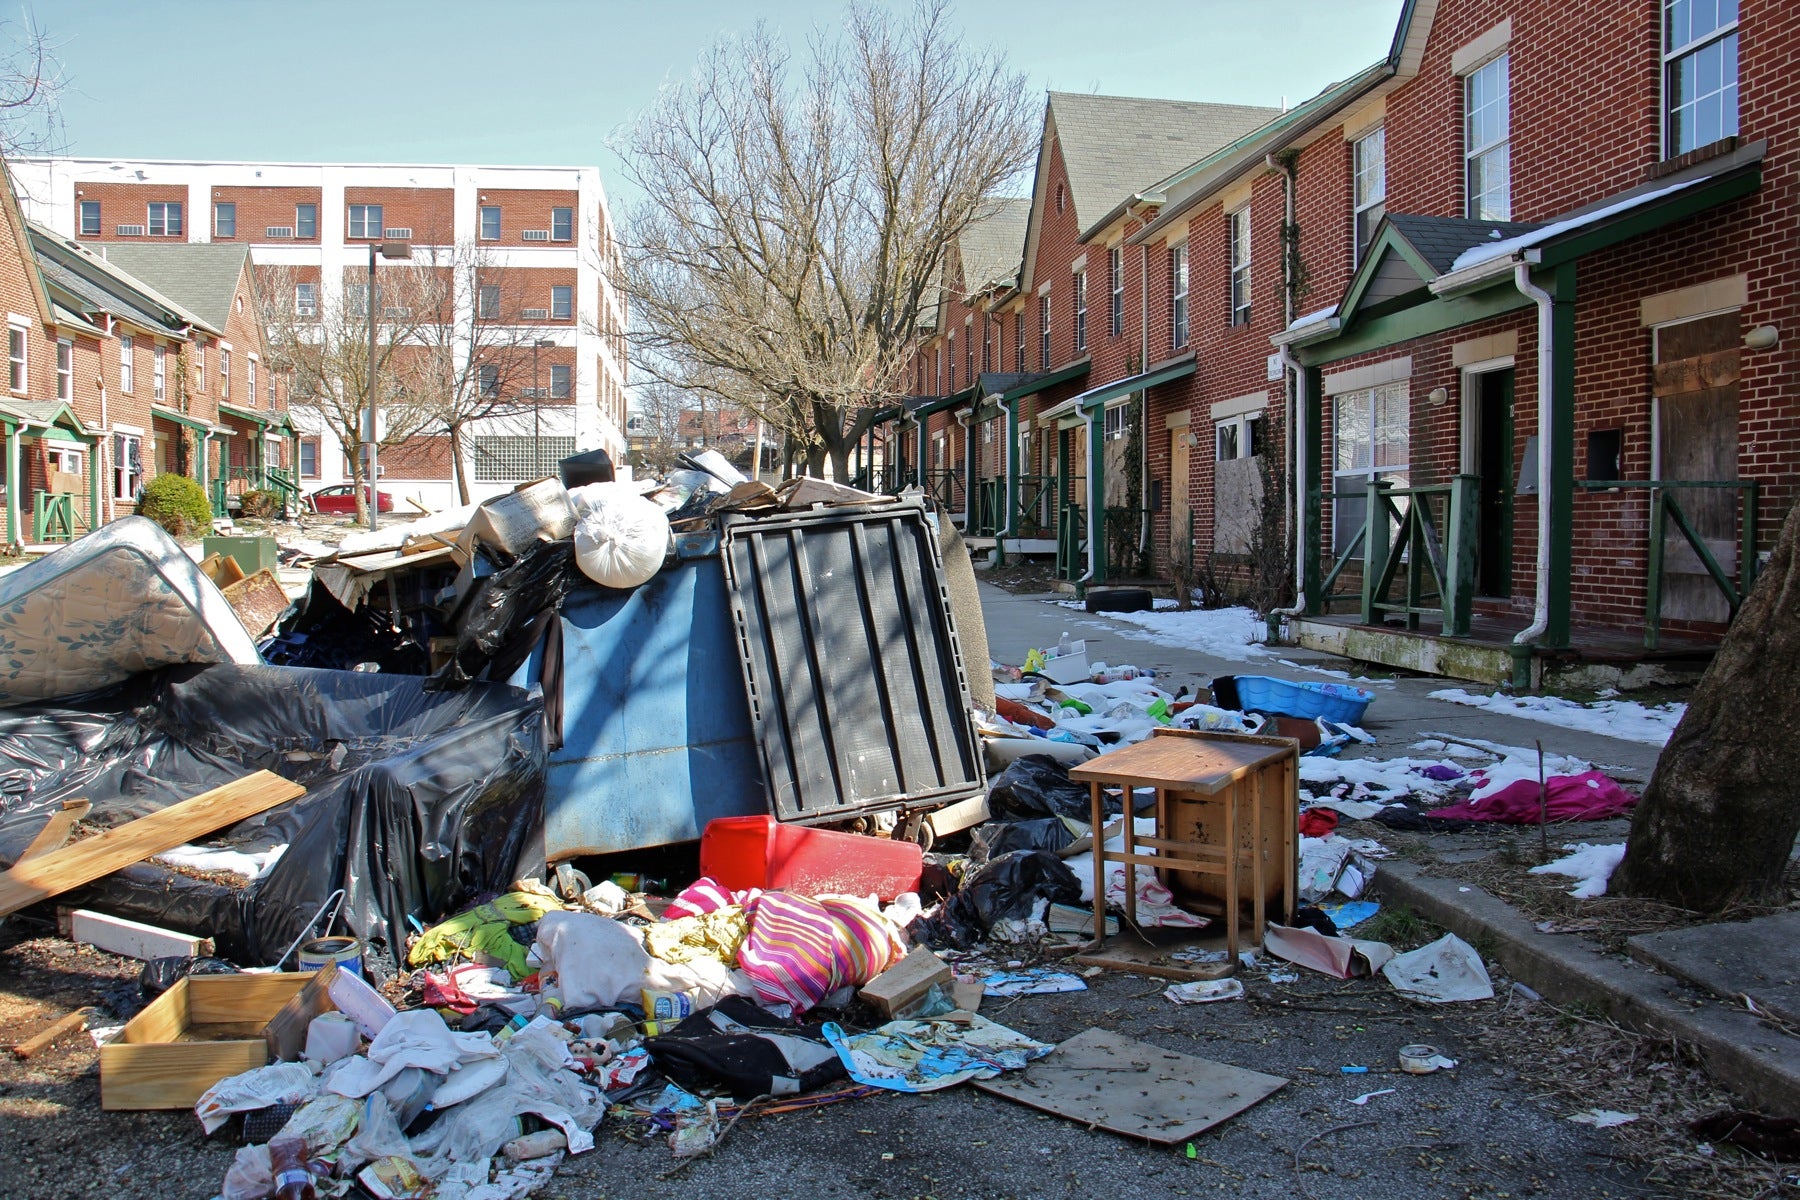 Garbage is piled in front of an apartment complex in Lower Germantown. (Emma Lee/WHYY)